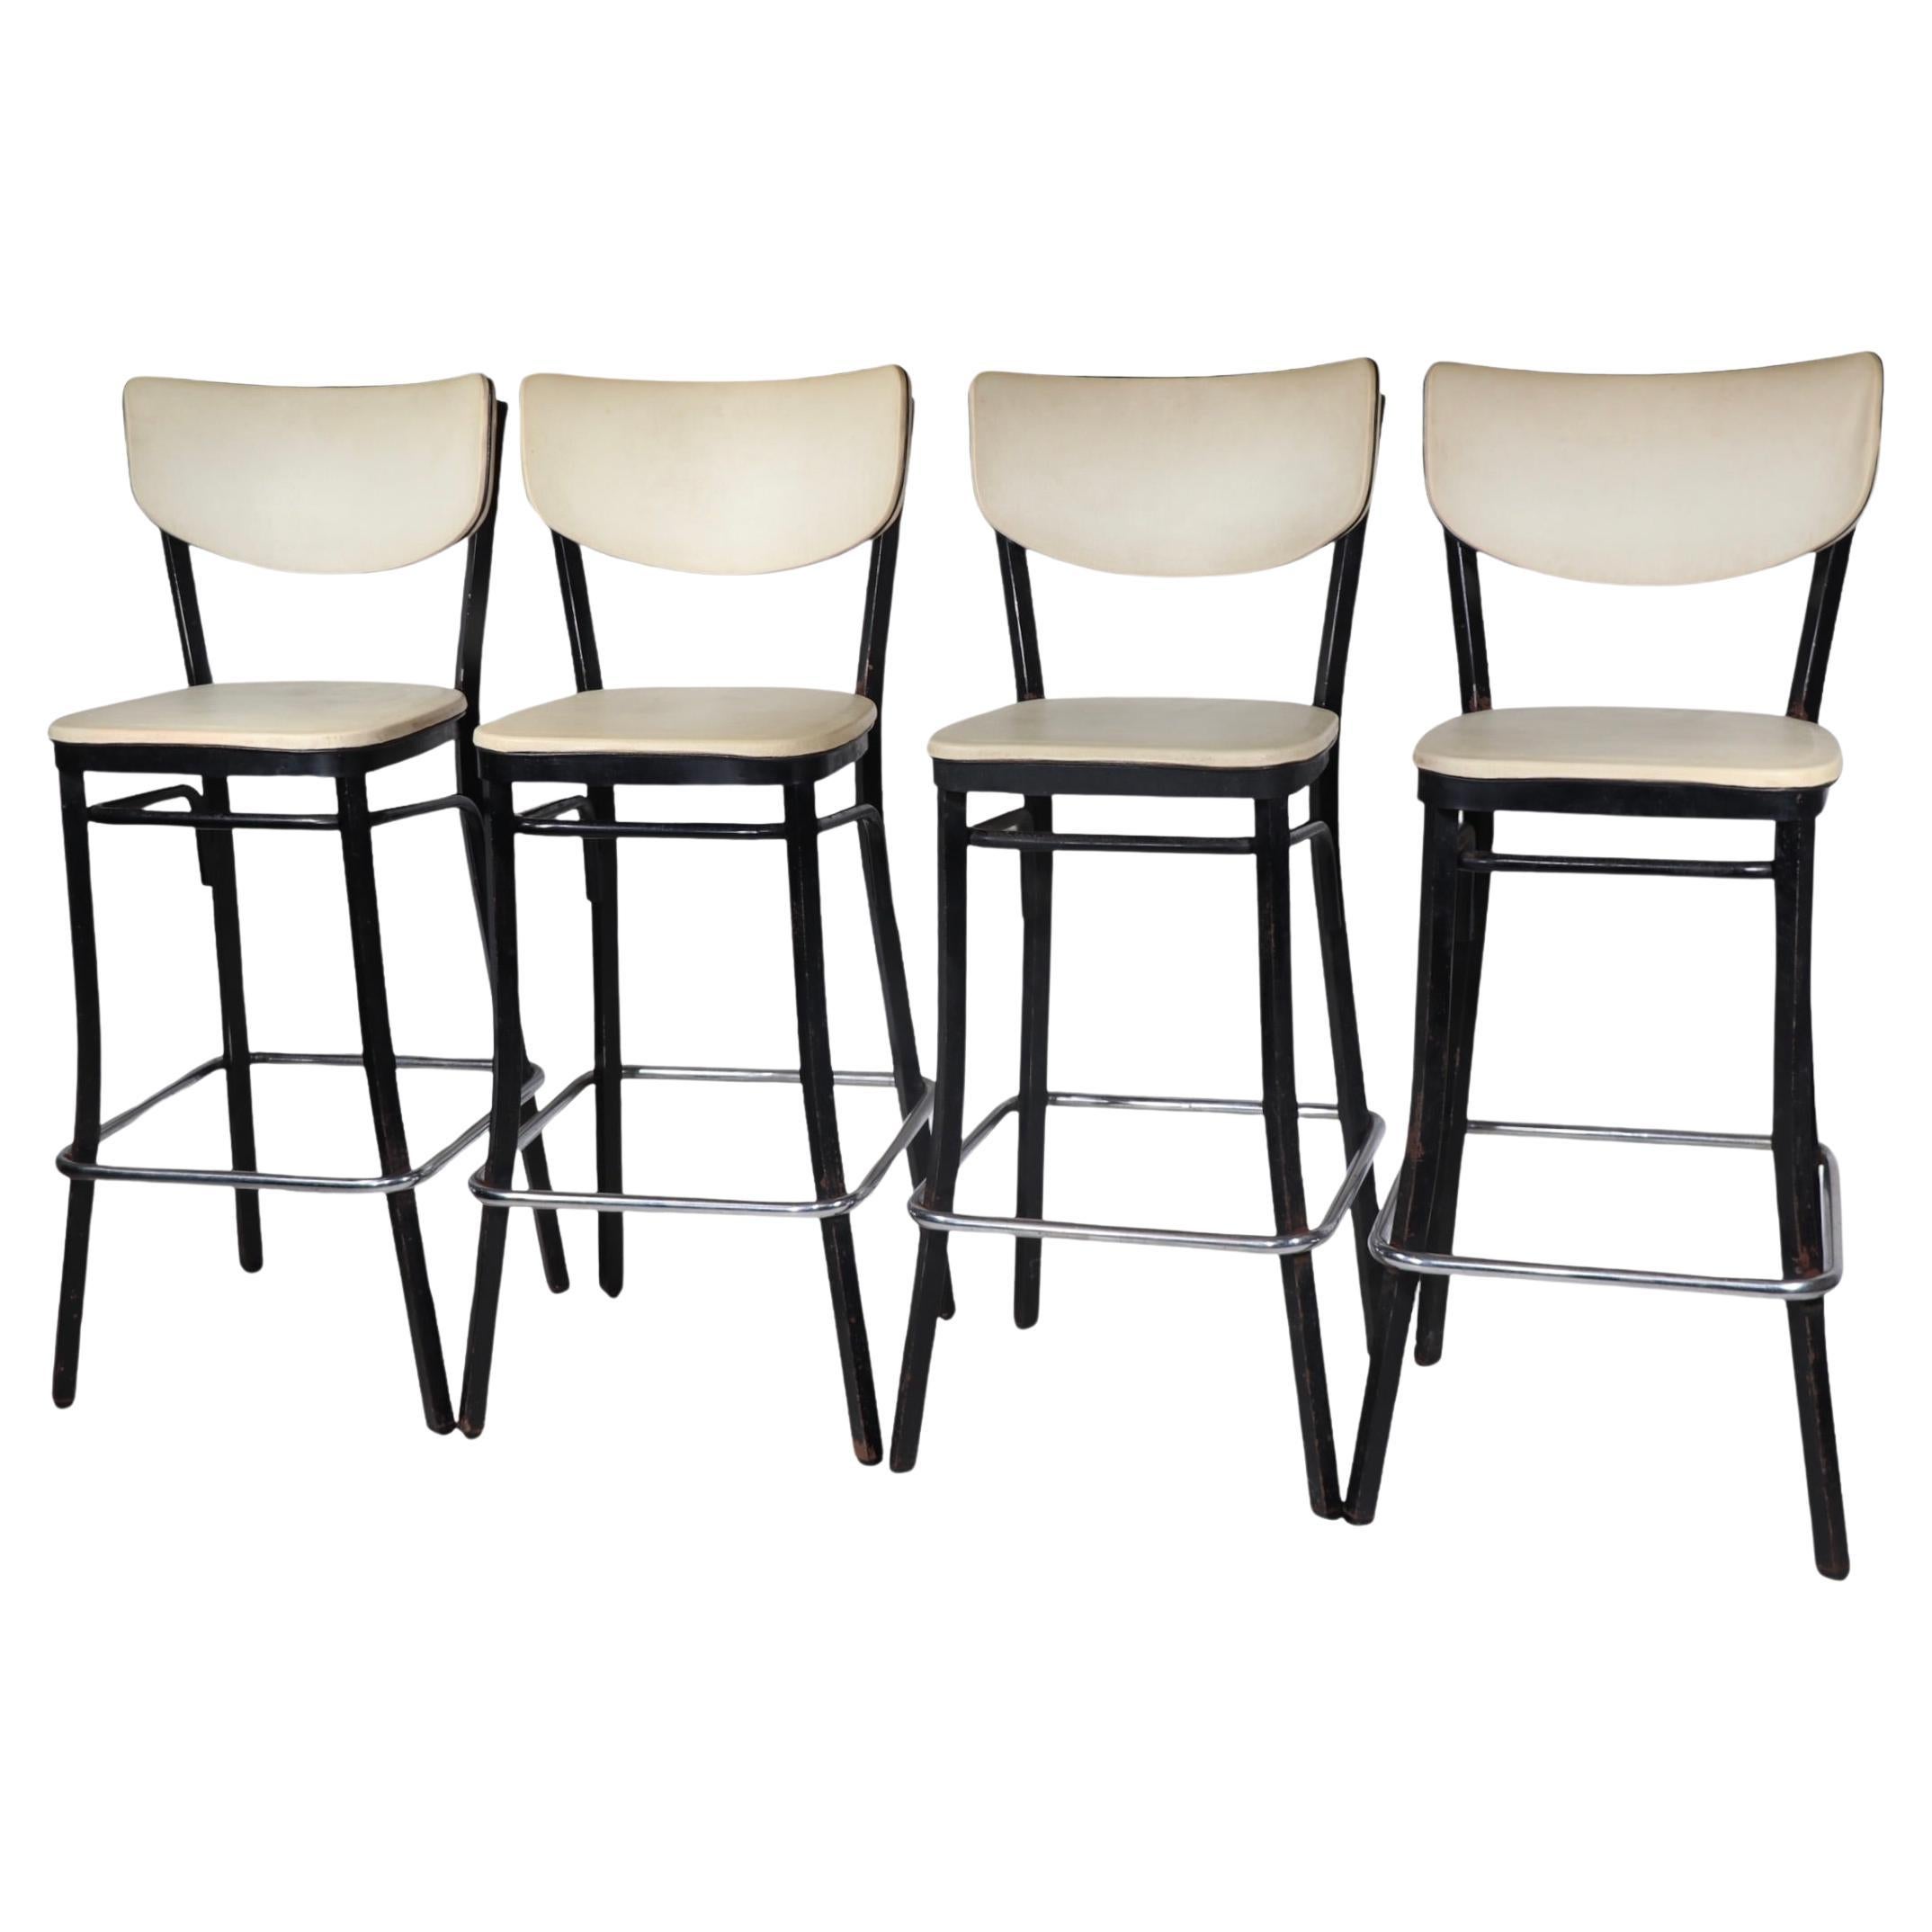 Set of Four Mid Century Bar Stools by Finer Chrome Products Co. Inc. c 1950/1960 For Sale